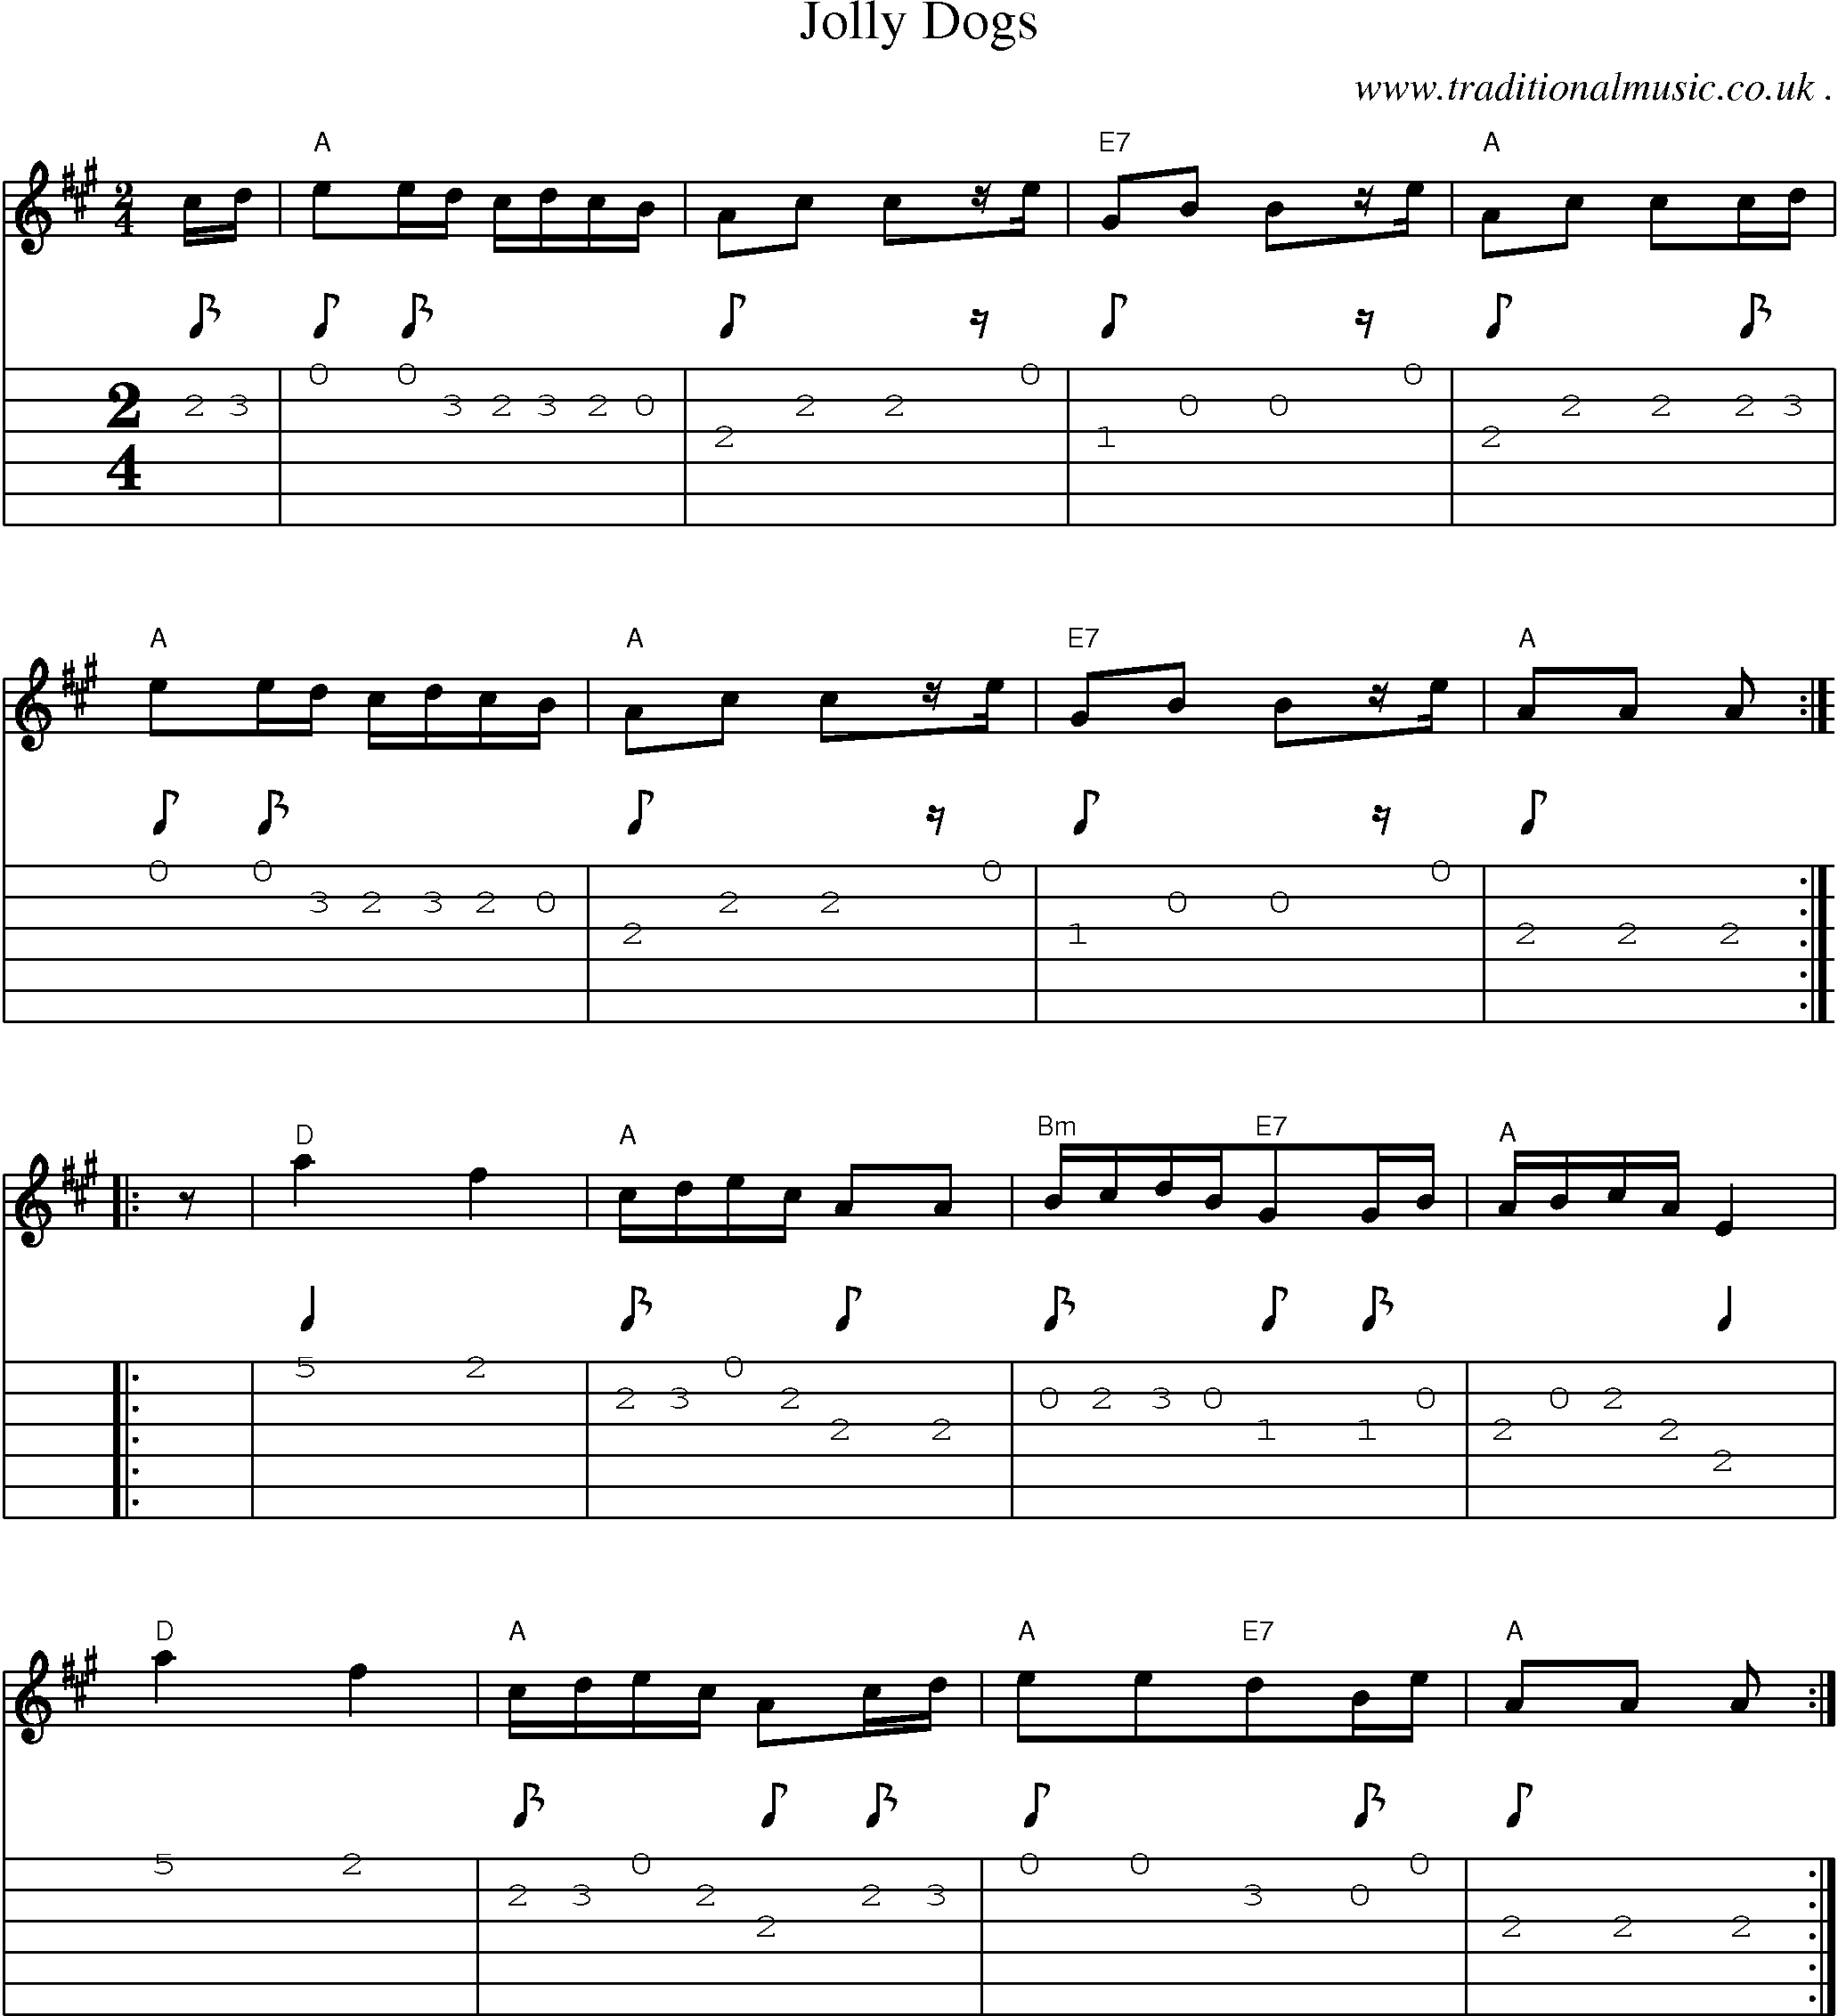 Sheet-Music and Guitar Tabs for Jolly Dogs